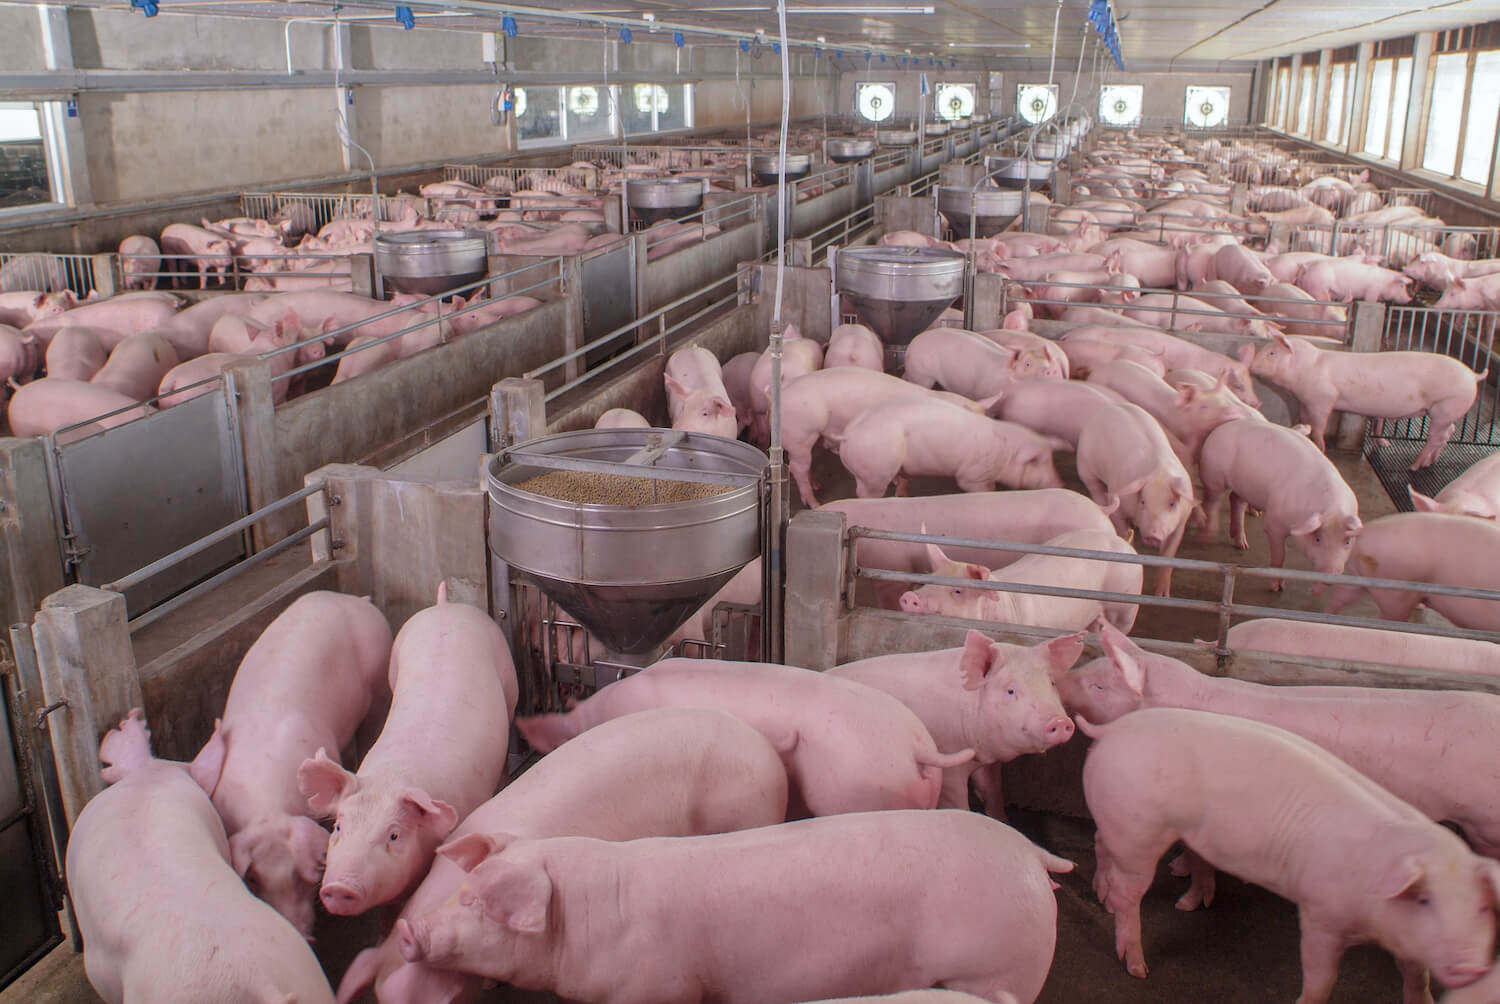 Nutritionists are putting livestock on diets to avoid slaughterhouse backups